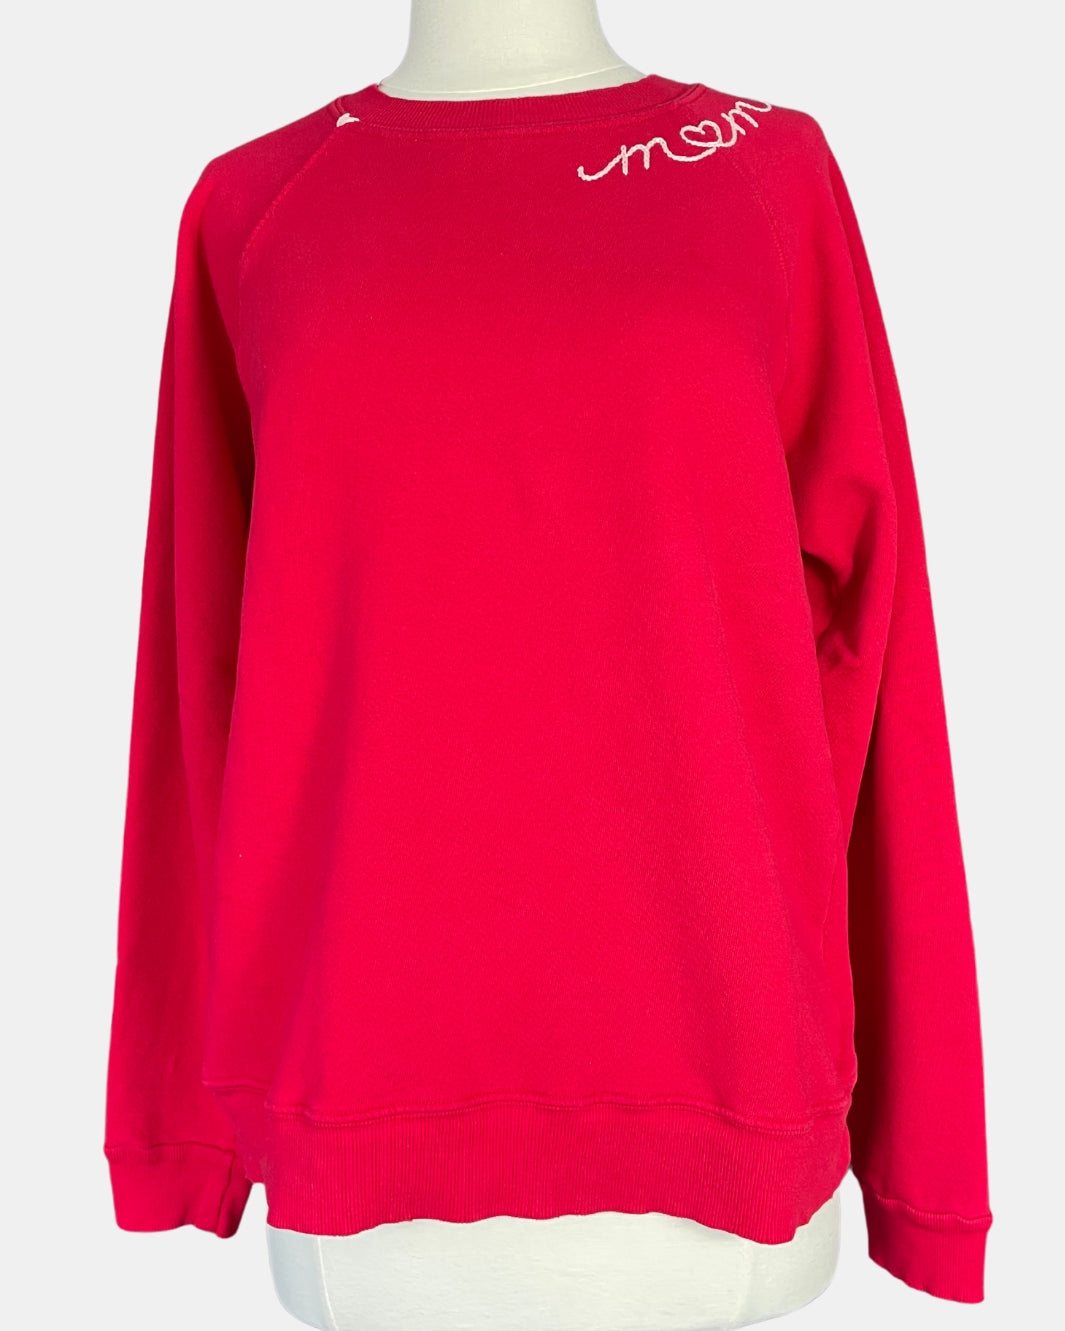 MOM EMBROIDERED CREWNECK IN RED - Romi Boutique